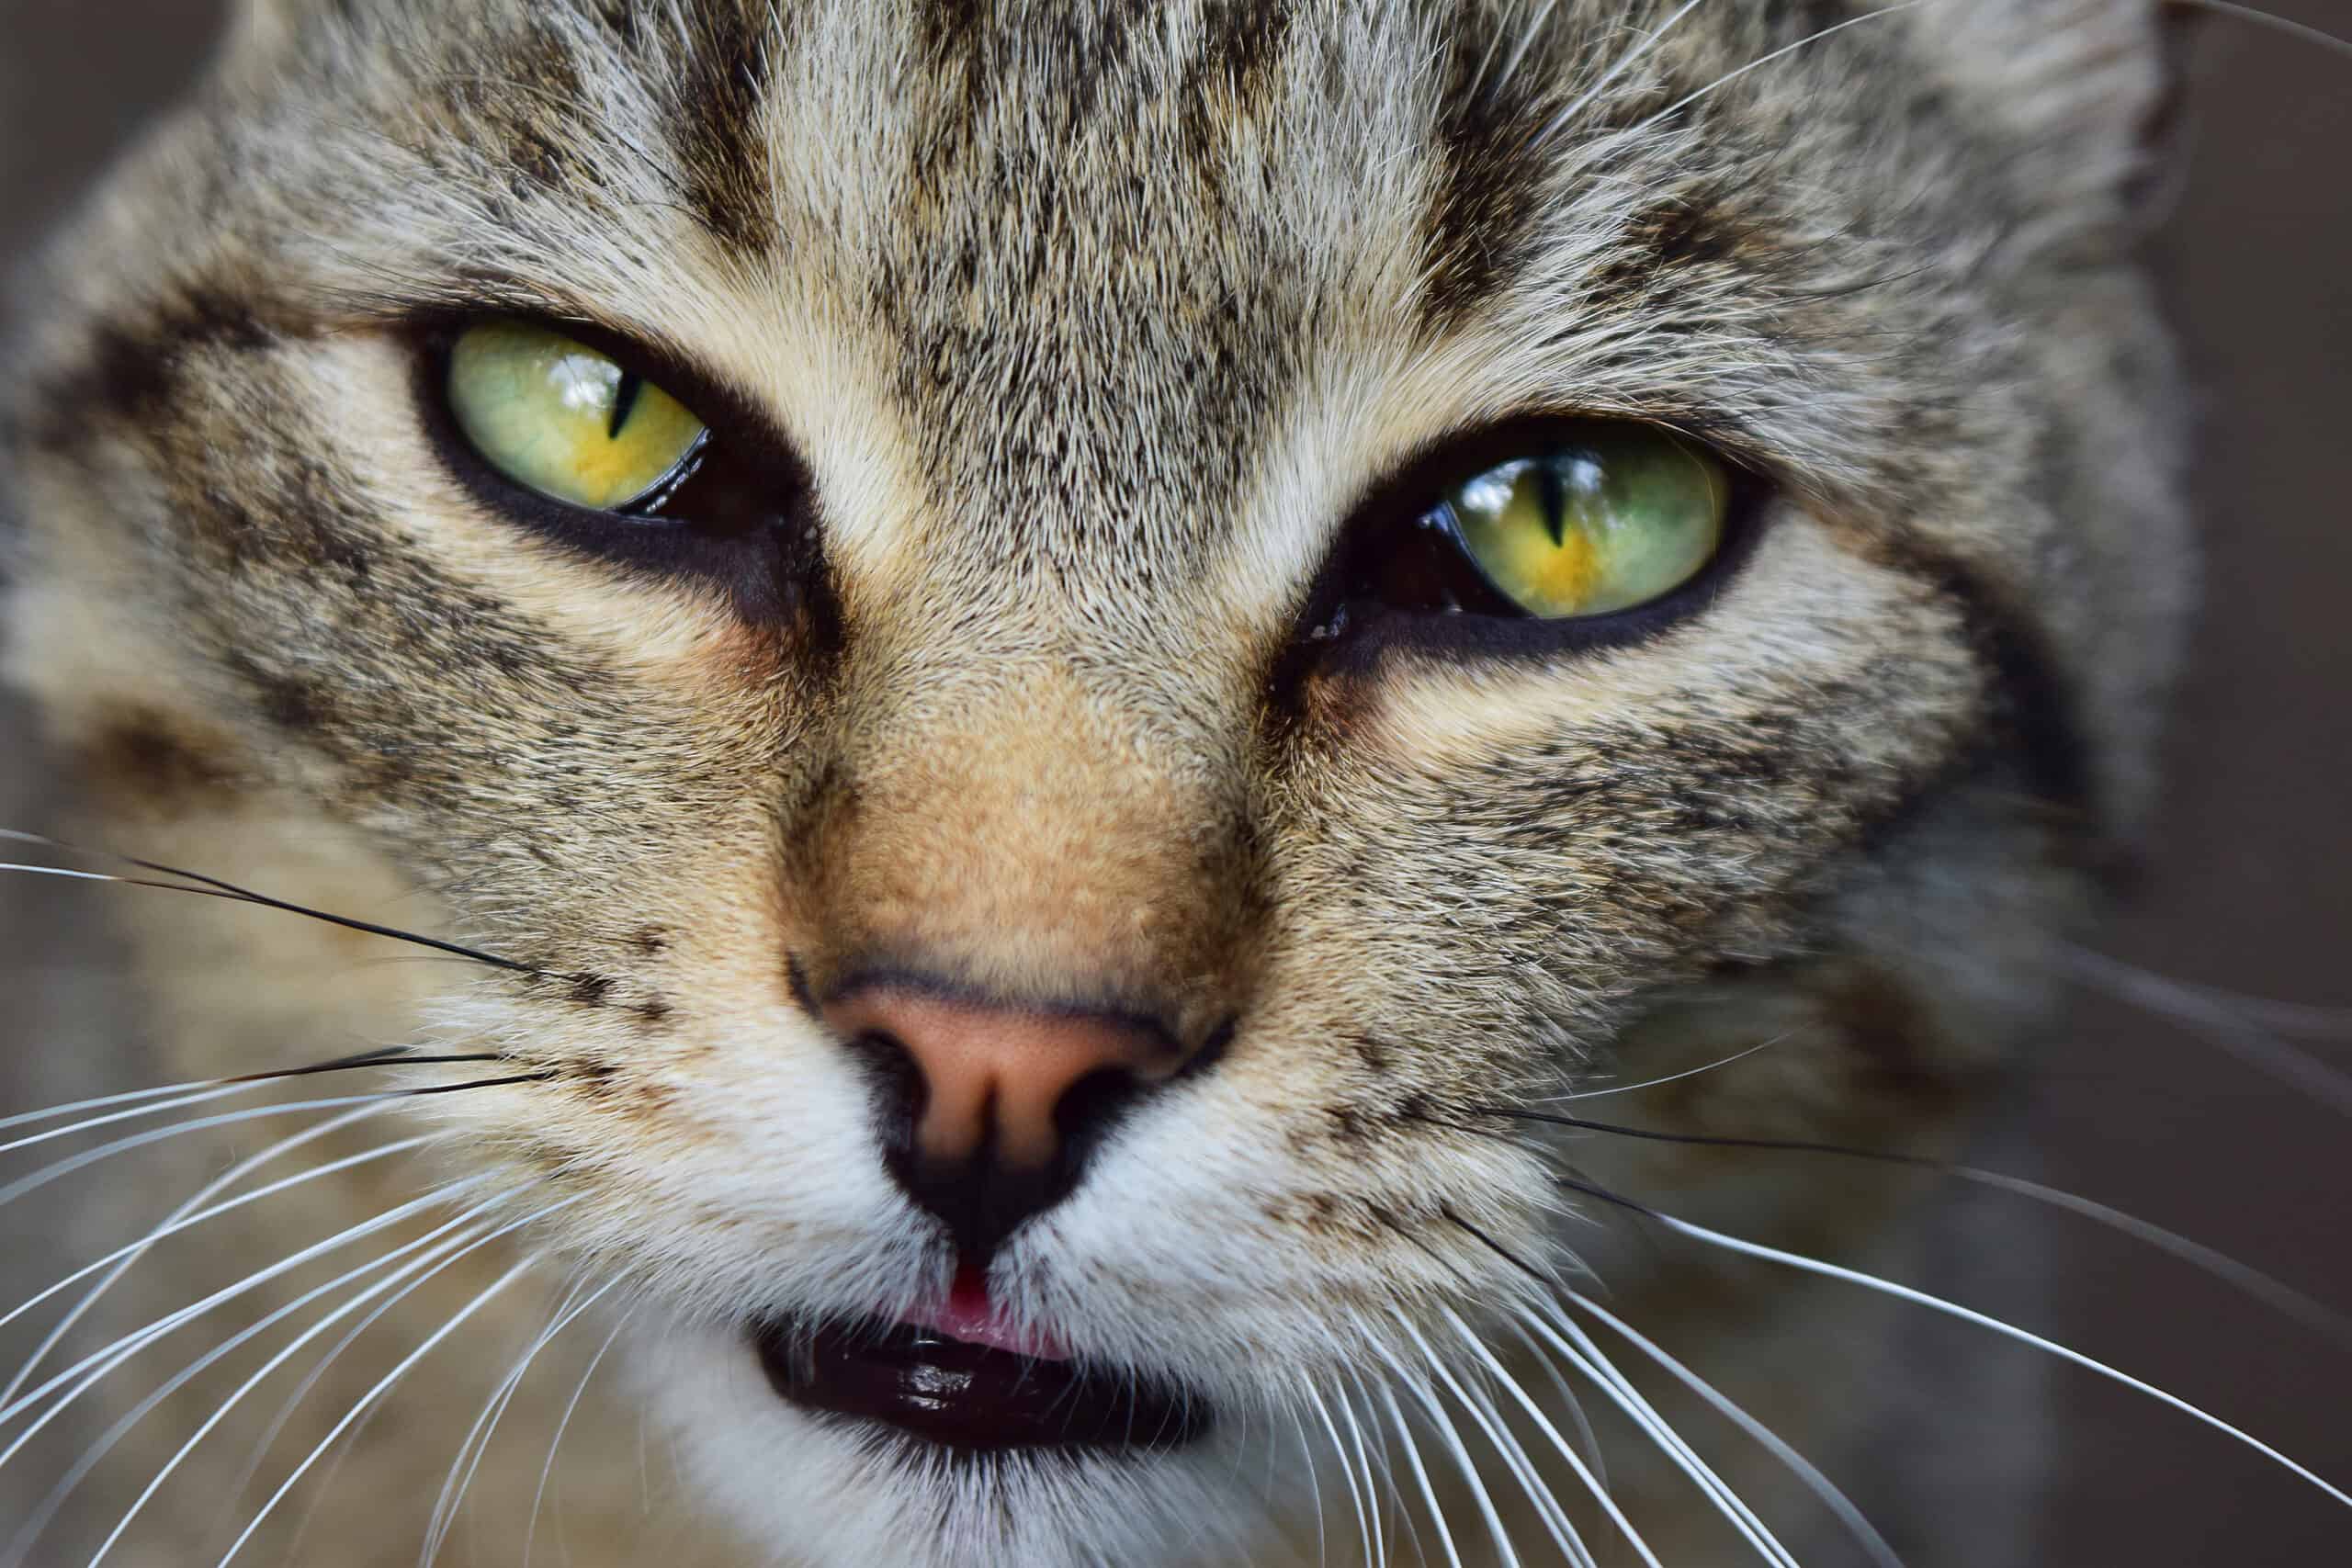 Why Do Cats Have A Third Eyelid?